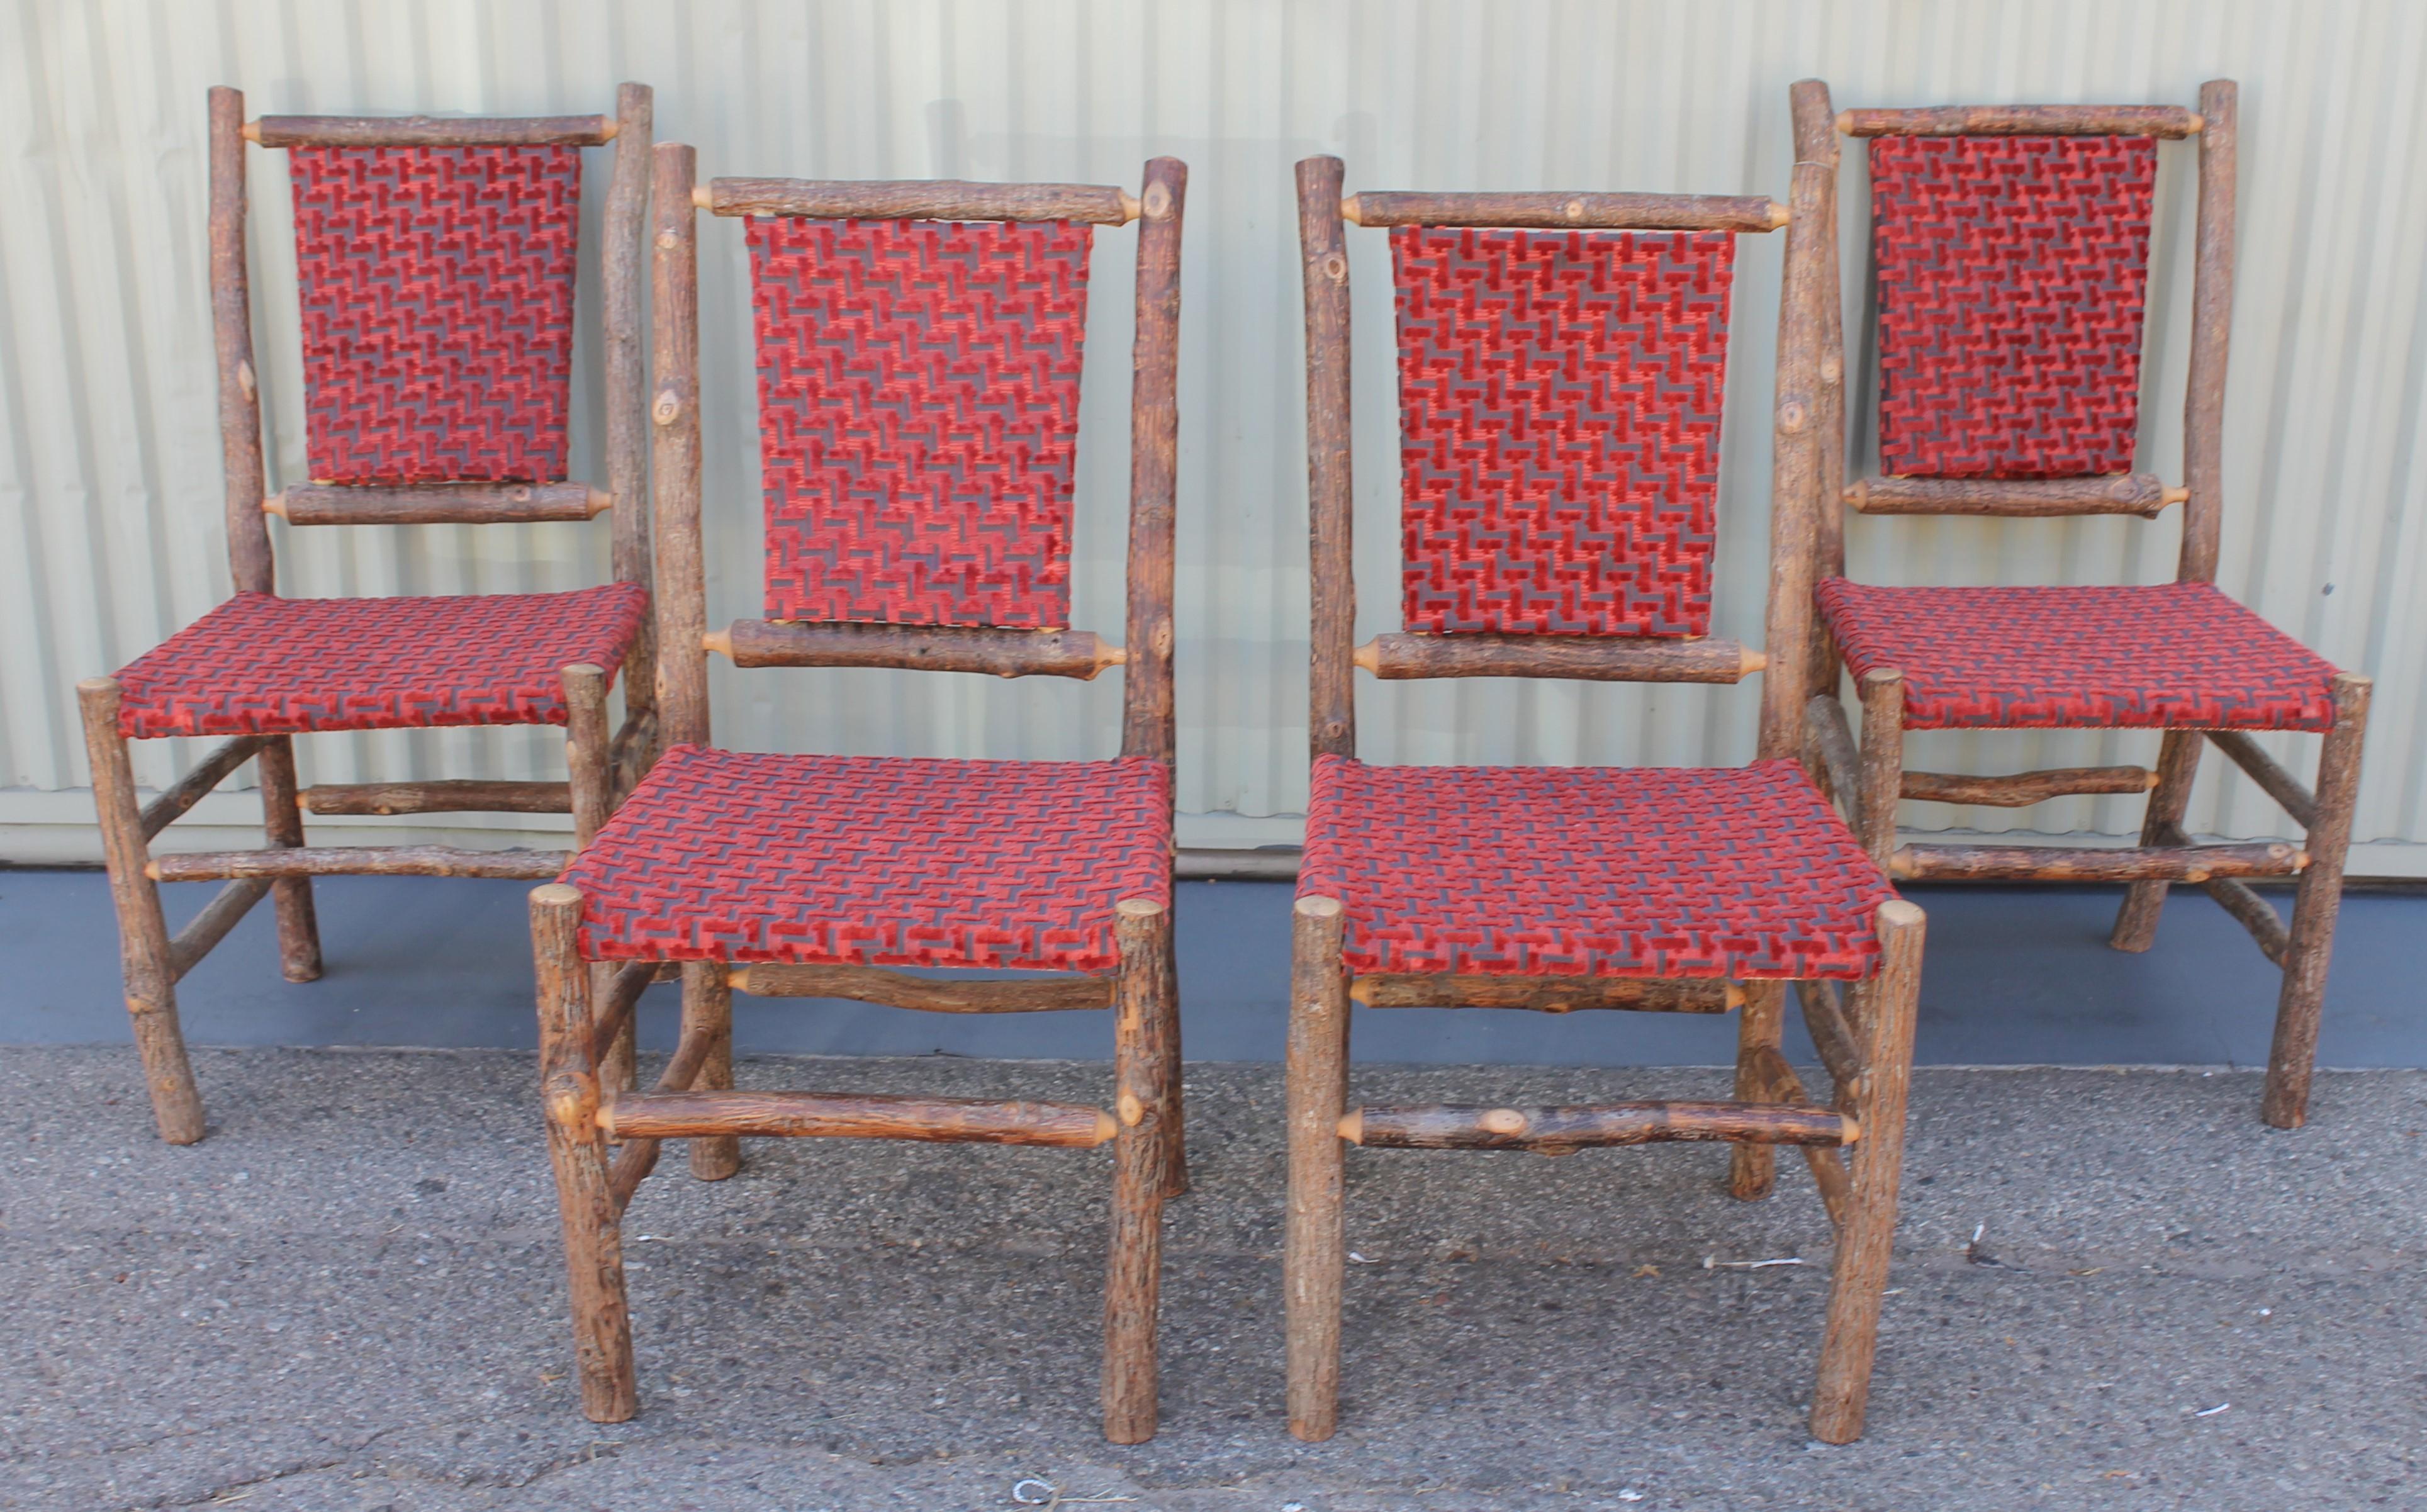 This set of matching Old Hickory chairs from Martinsville, Indiana are in pristine condition and upholstered in a red striped cord fabric. They are very sturdy and comfortable.